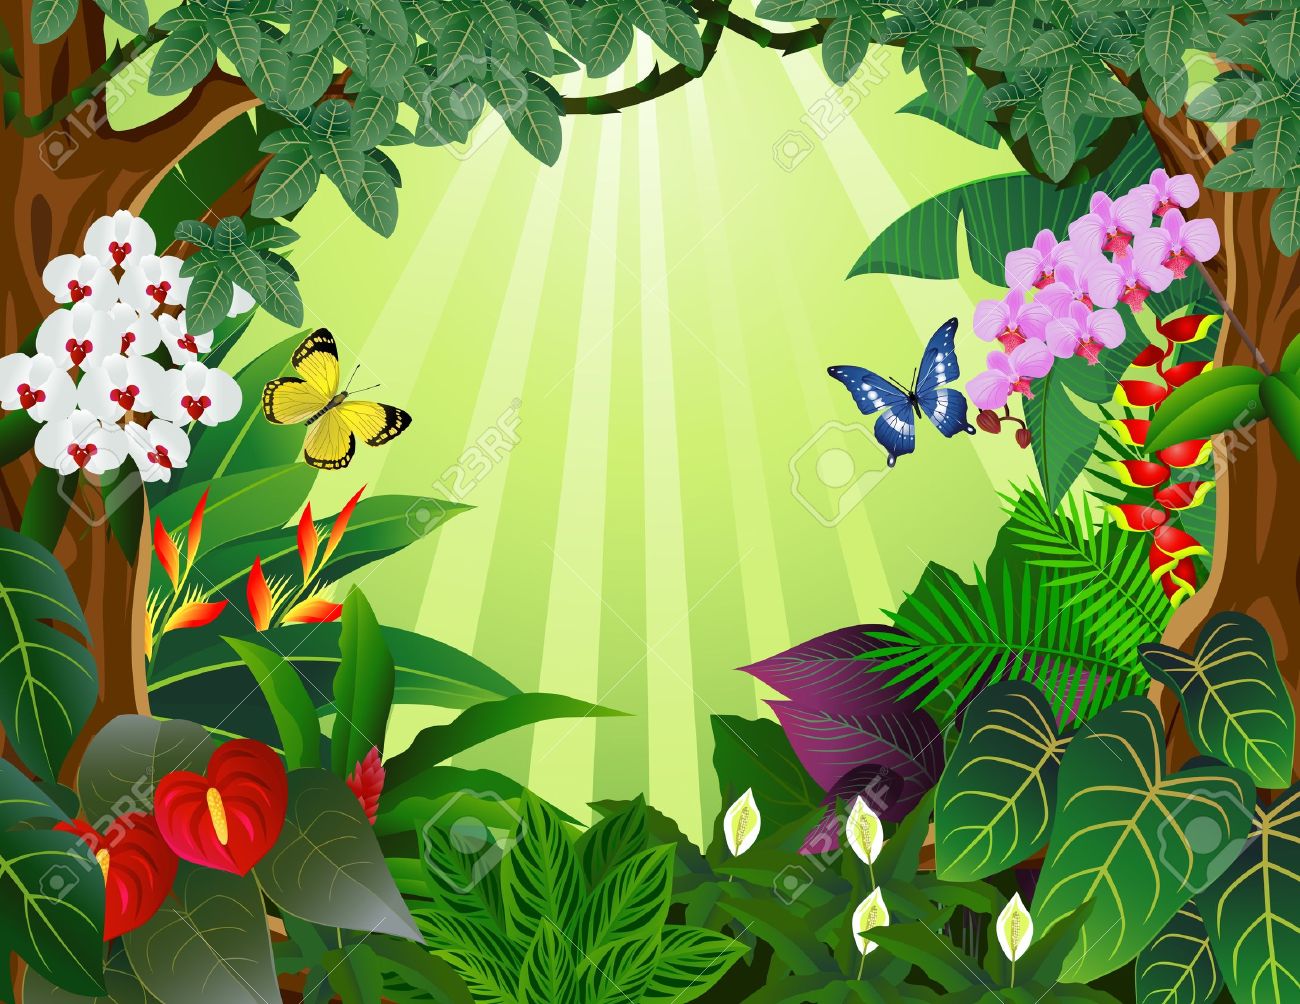 Rainforest clipart #8, Download drawings